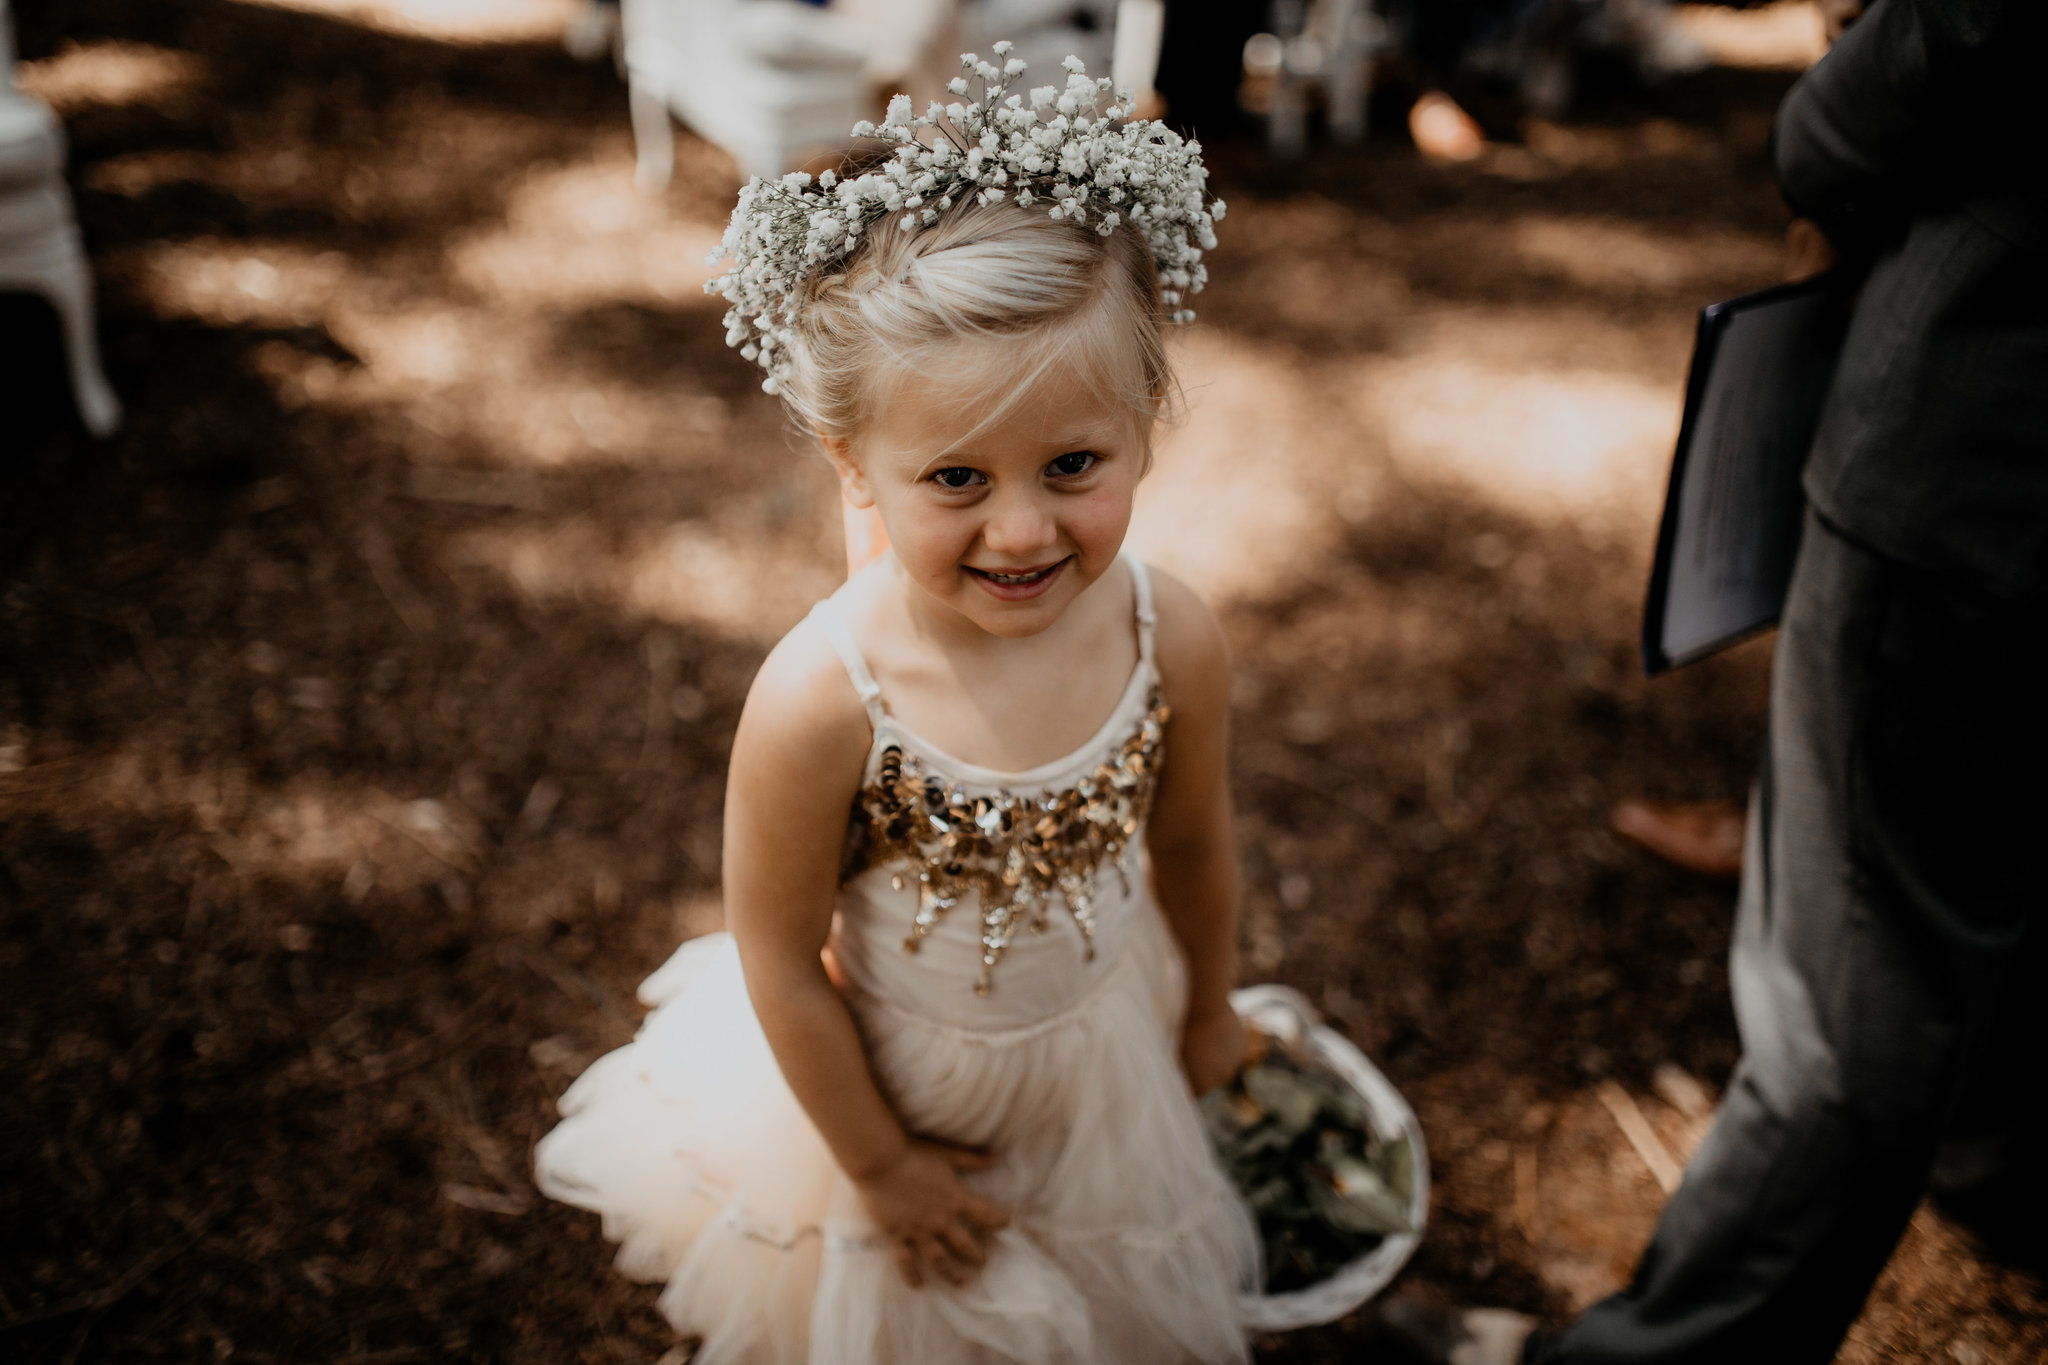 Olivia & Steven - A Vintage Fairytale Wedding in the Woods